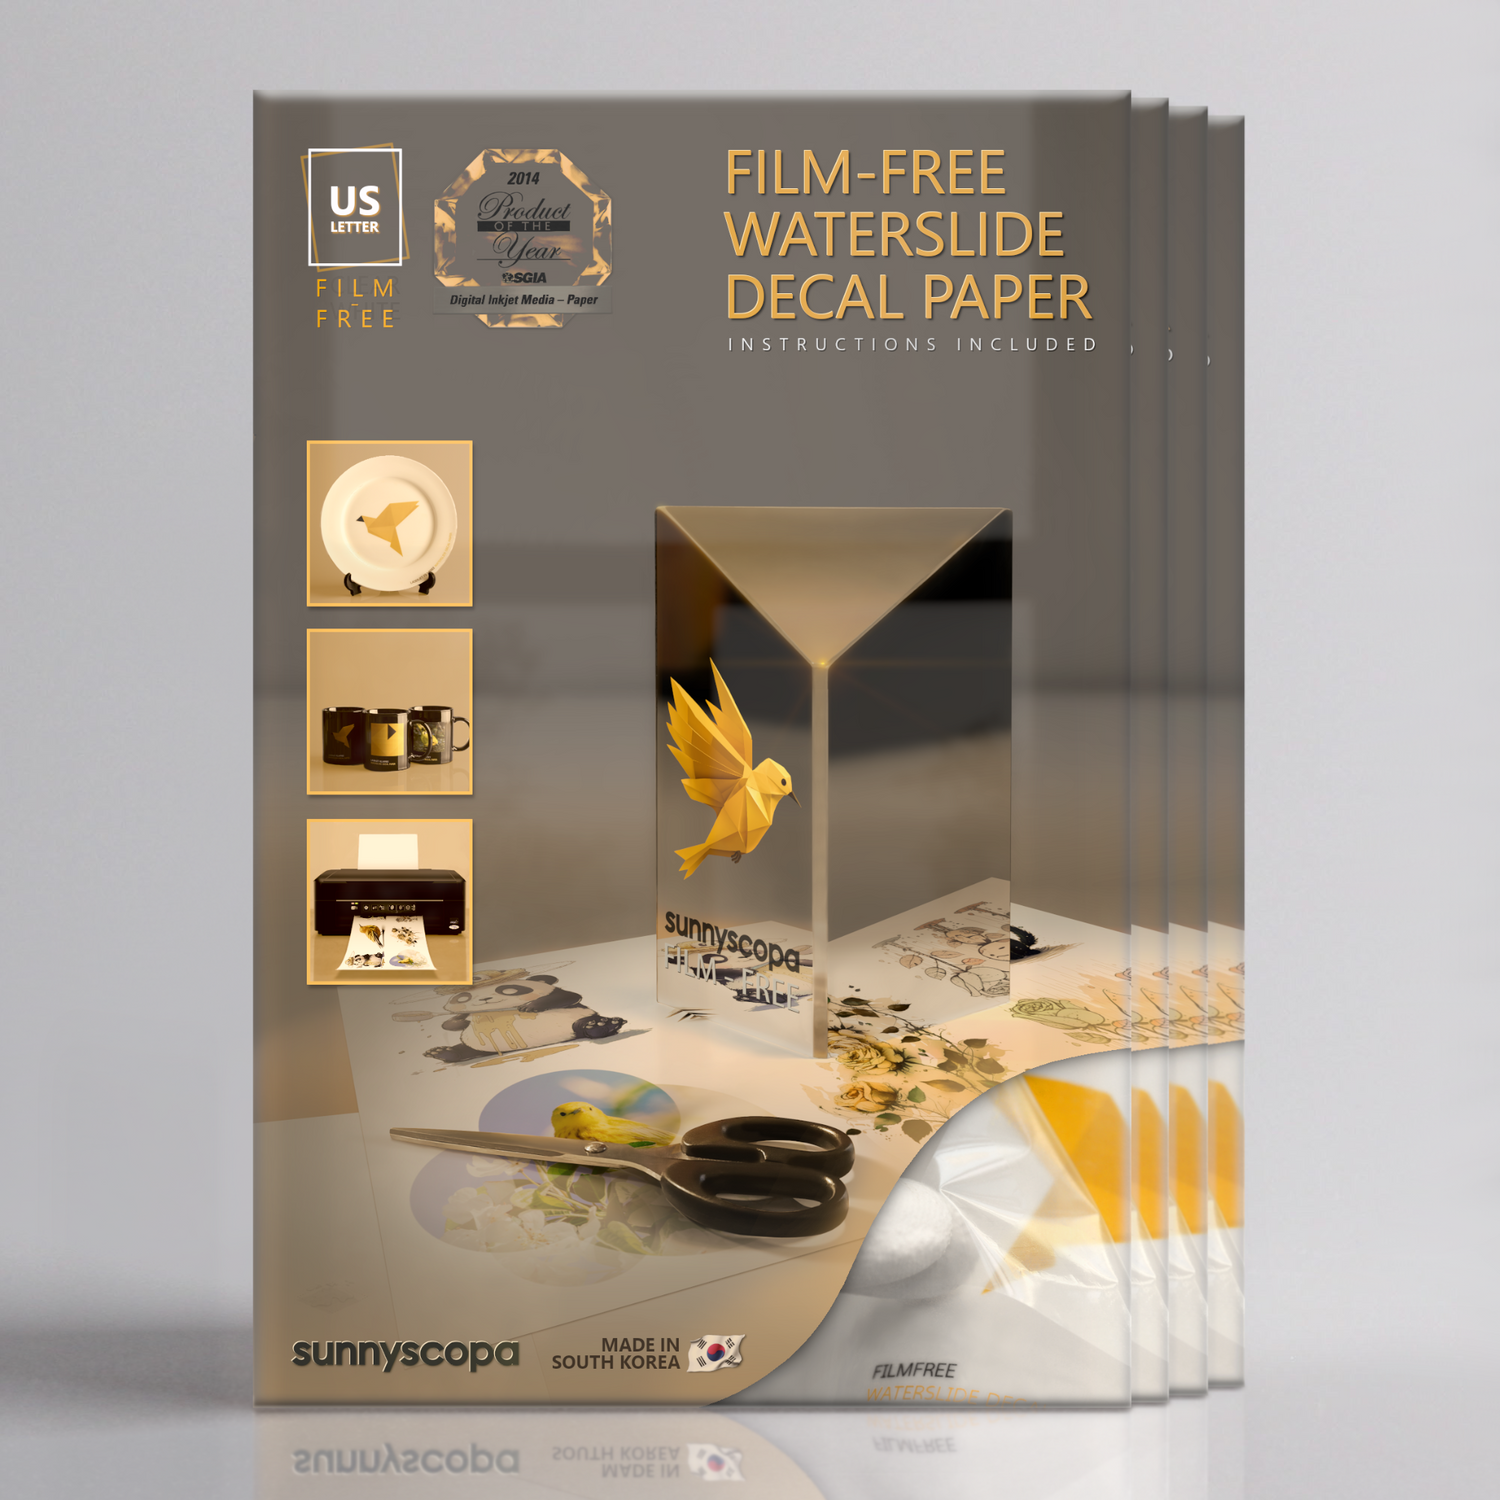 What is Film-Free Decal Paper?